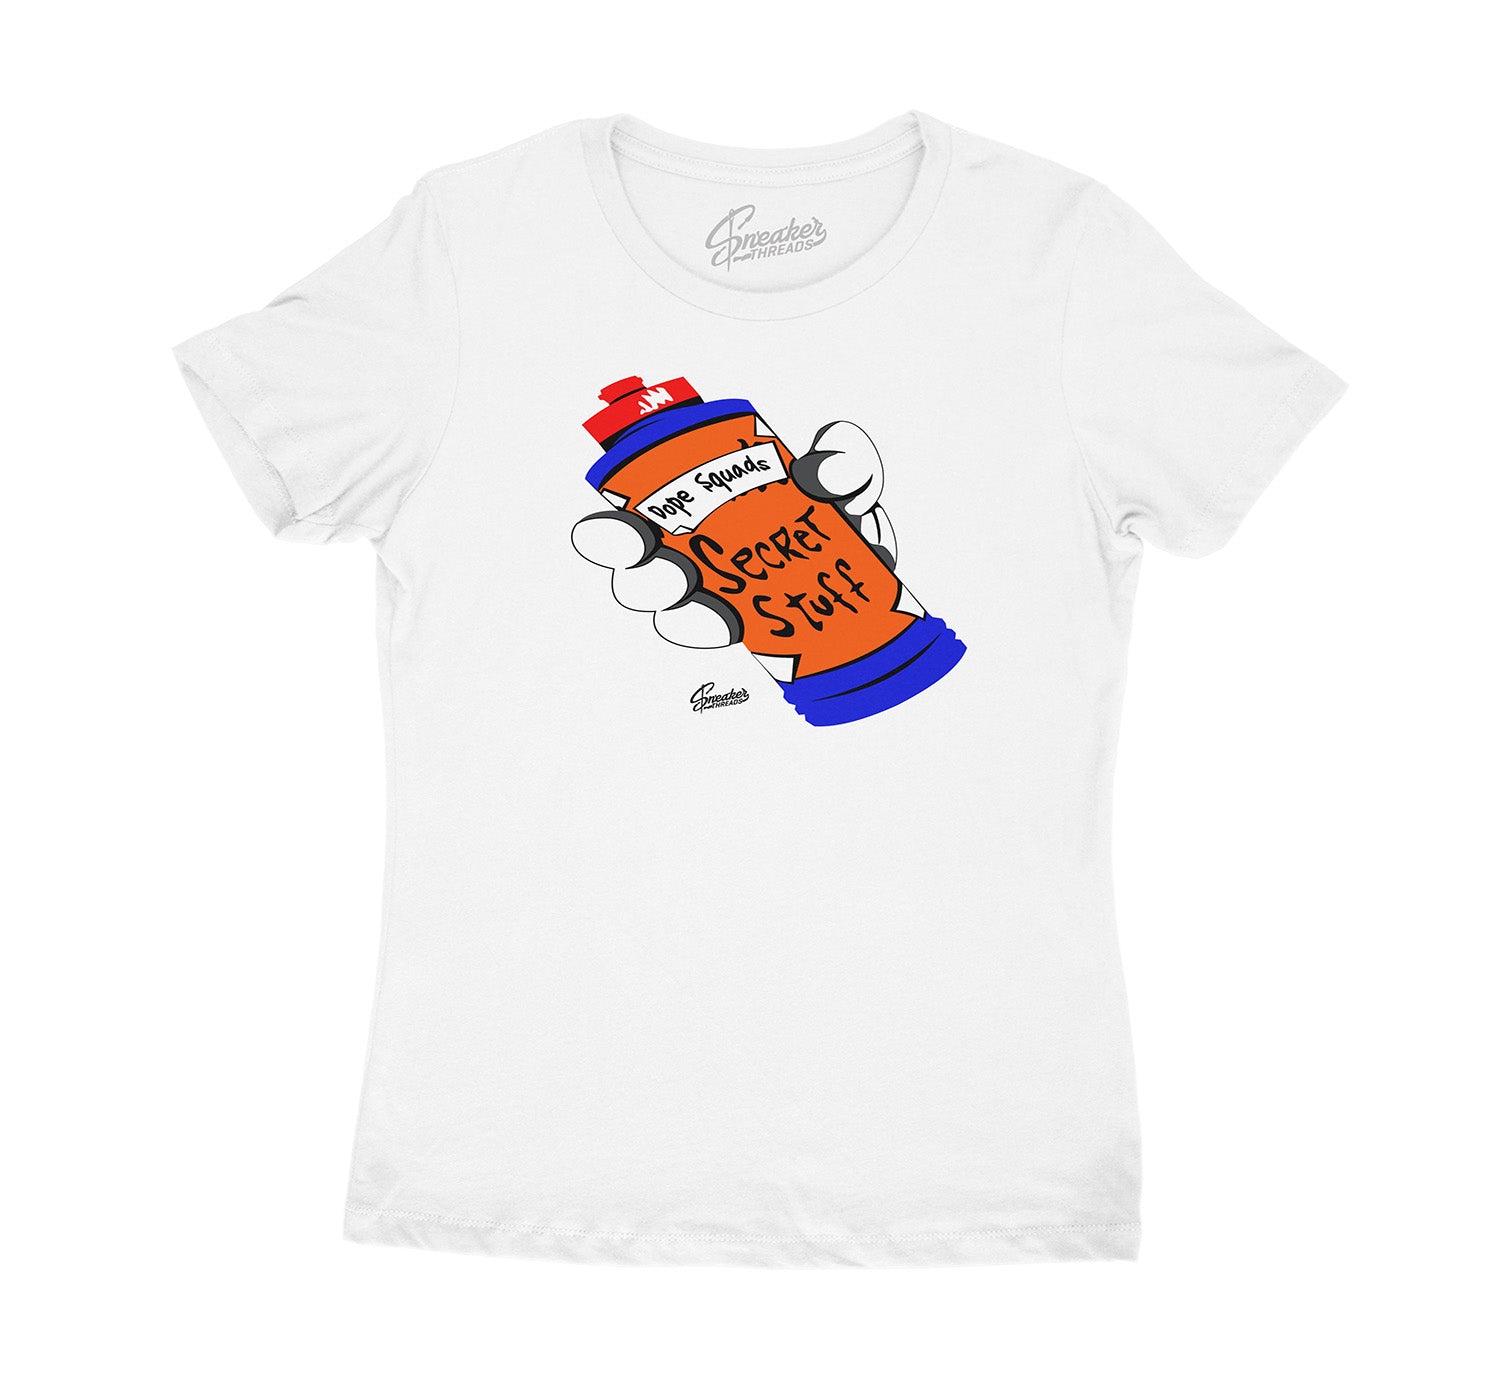 Womens shirt collection made to match the Jordan 3 knicks sneaker collection